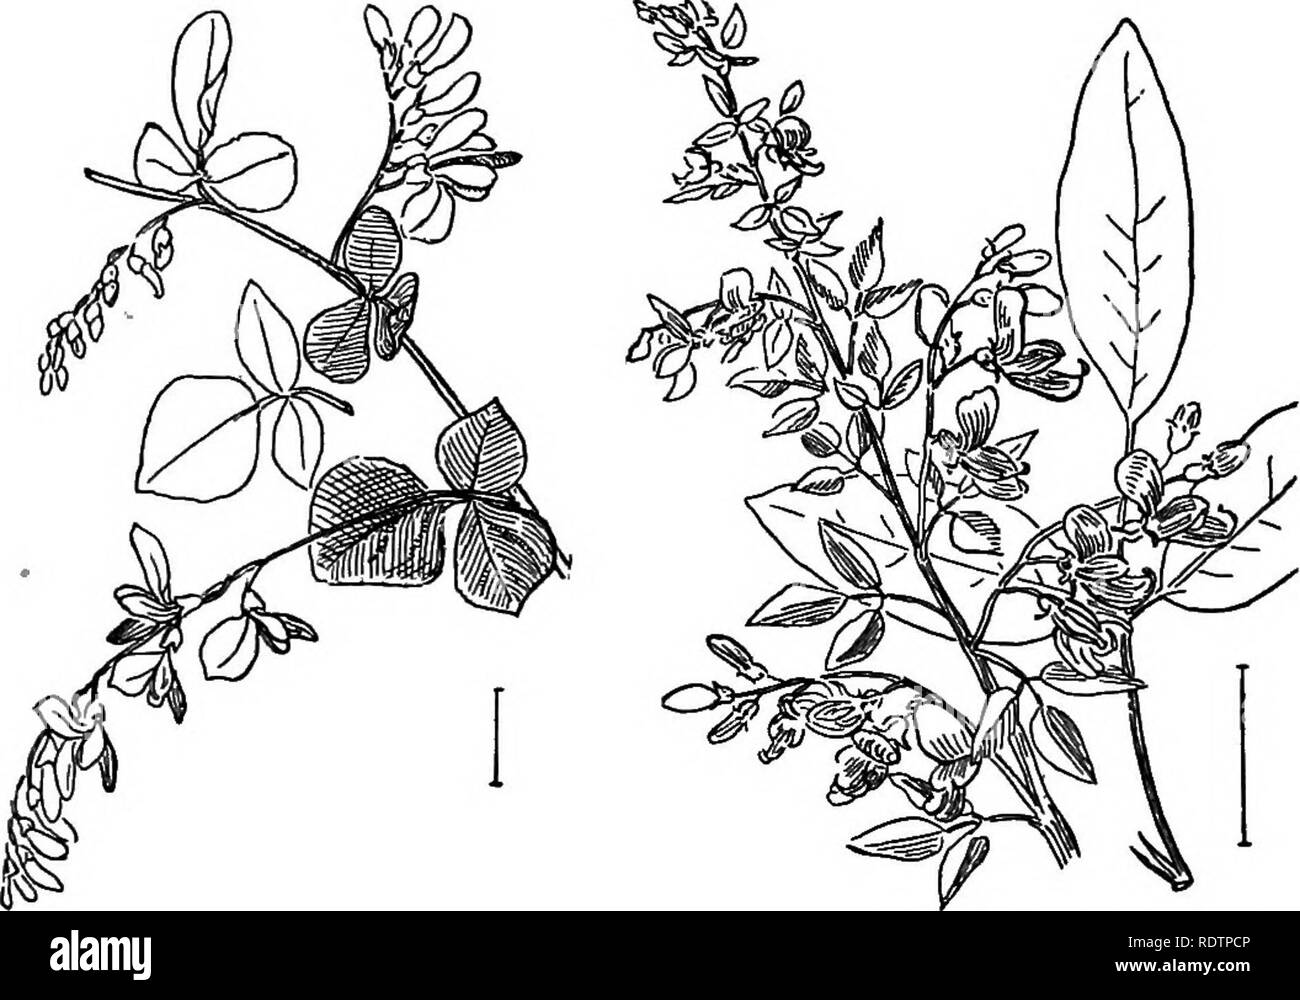 . Ornamental shrubs of the United States (hardy, cultivated). Shrubs. 124 DESCRIPTIONS OP THE SHRUBS KEY TO THE CULTIVATED COLUTEAS * Flowers lemon-yellow, J inch long, 3-8 in a cluster; shrub to 15 feet; leaves with 9-13 dull green blades J-1 inch long. Tall Colutea (150) — Colutea arborgscens. * Flowers orange to brownish, 3-6 in a cluster. (A.) A. Pod closed at tip. Orange-floweked Colutea (151) —Colutea mMia. A. Pod open at tip. Oriental Colutea — Colutea orientMis. Lespedeza. The Lespedezas or Bush ' Clovers ' are mainly herba- ceous, but one species in cultivation is shrubby, and two oth Stock Photo